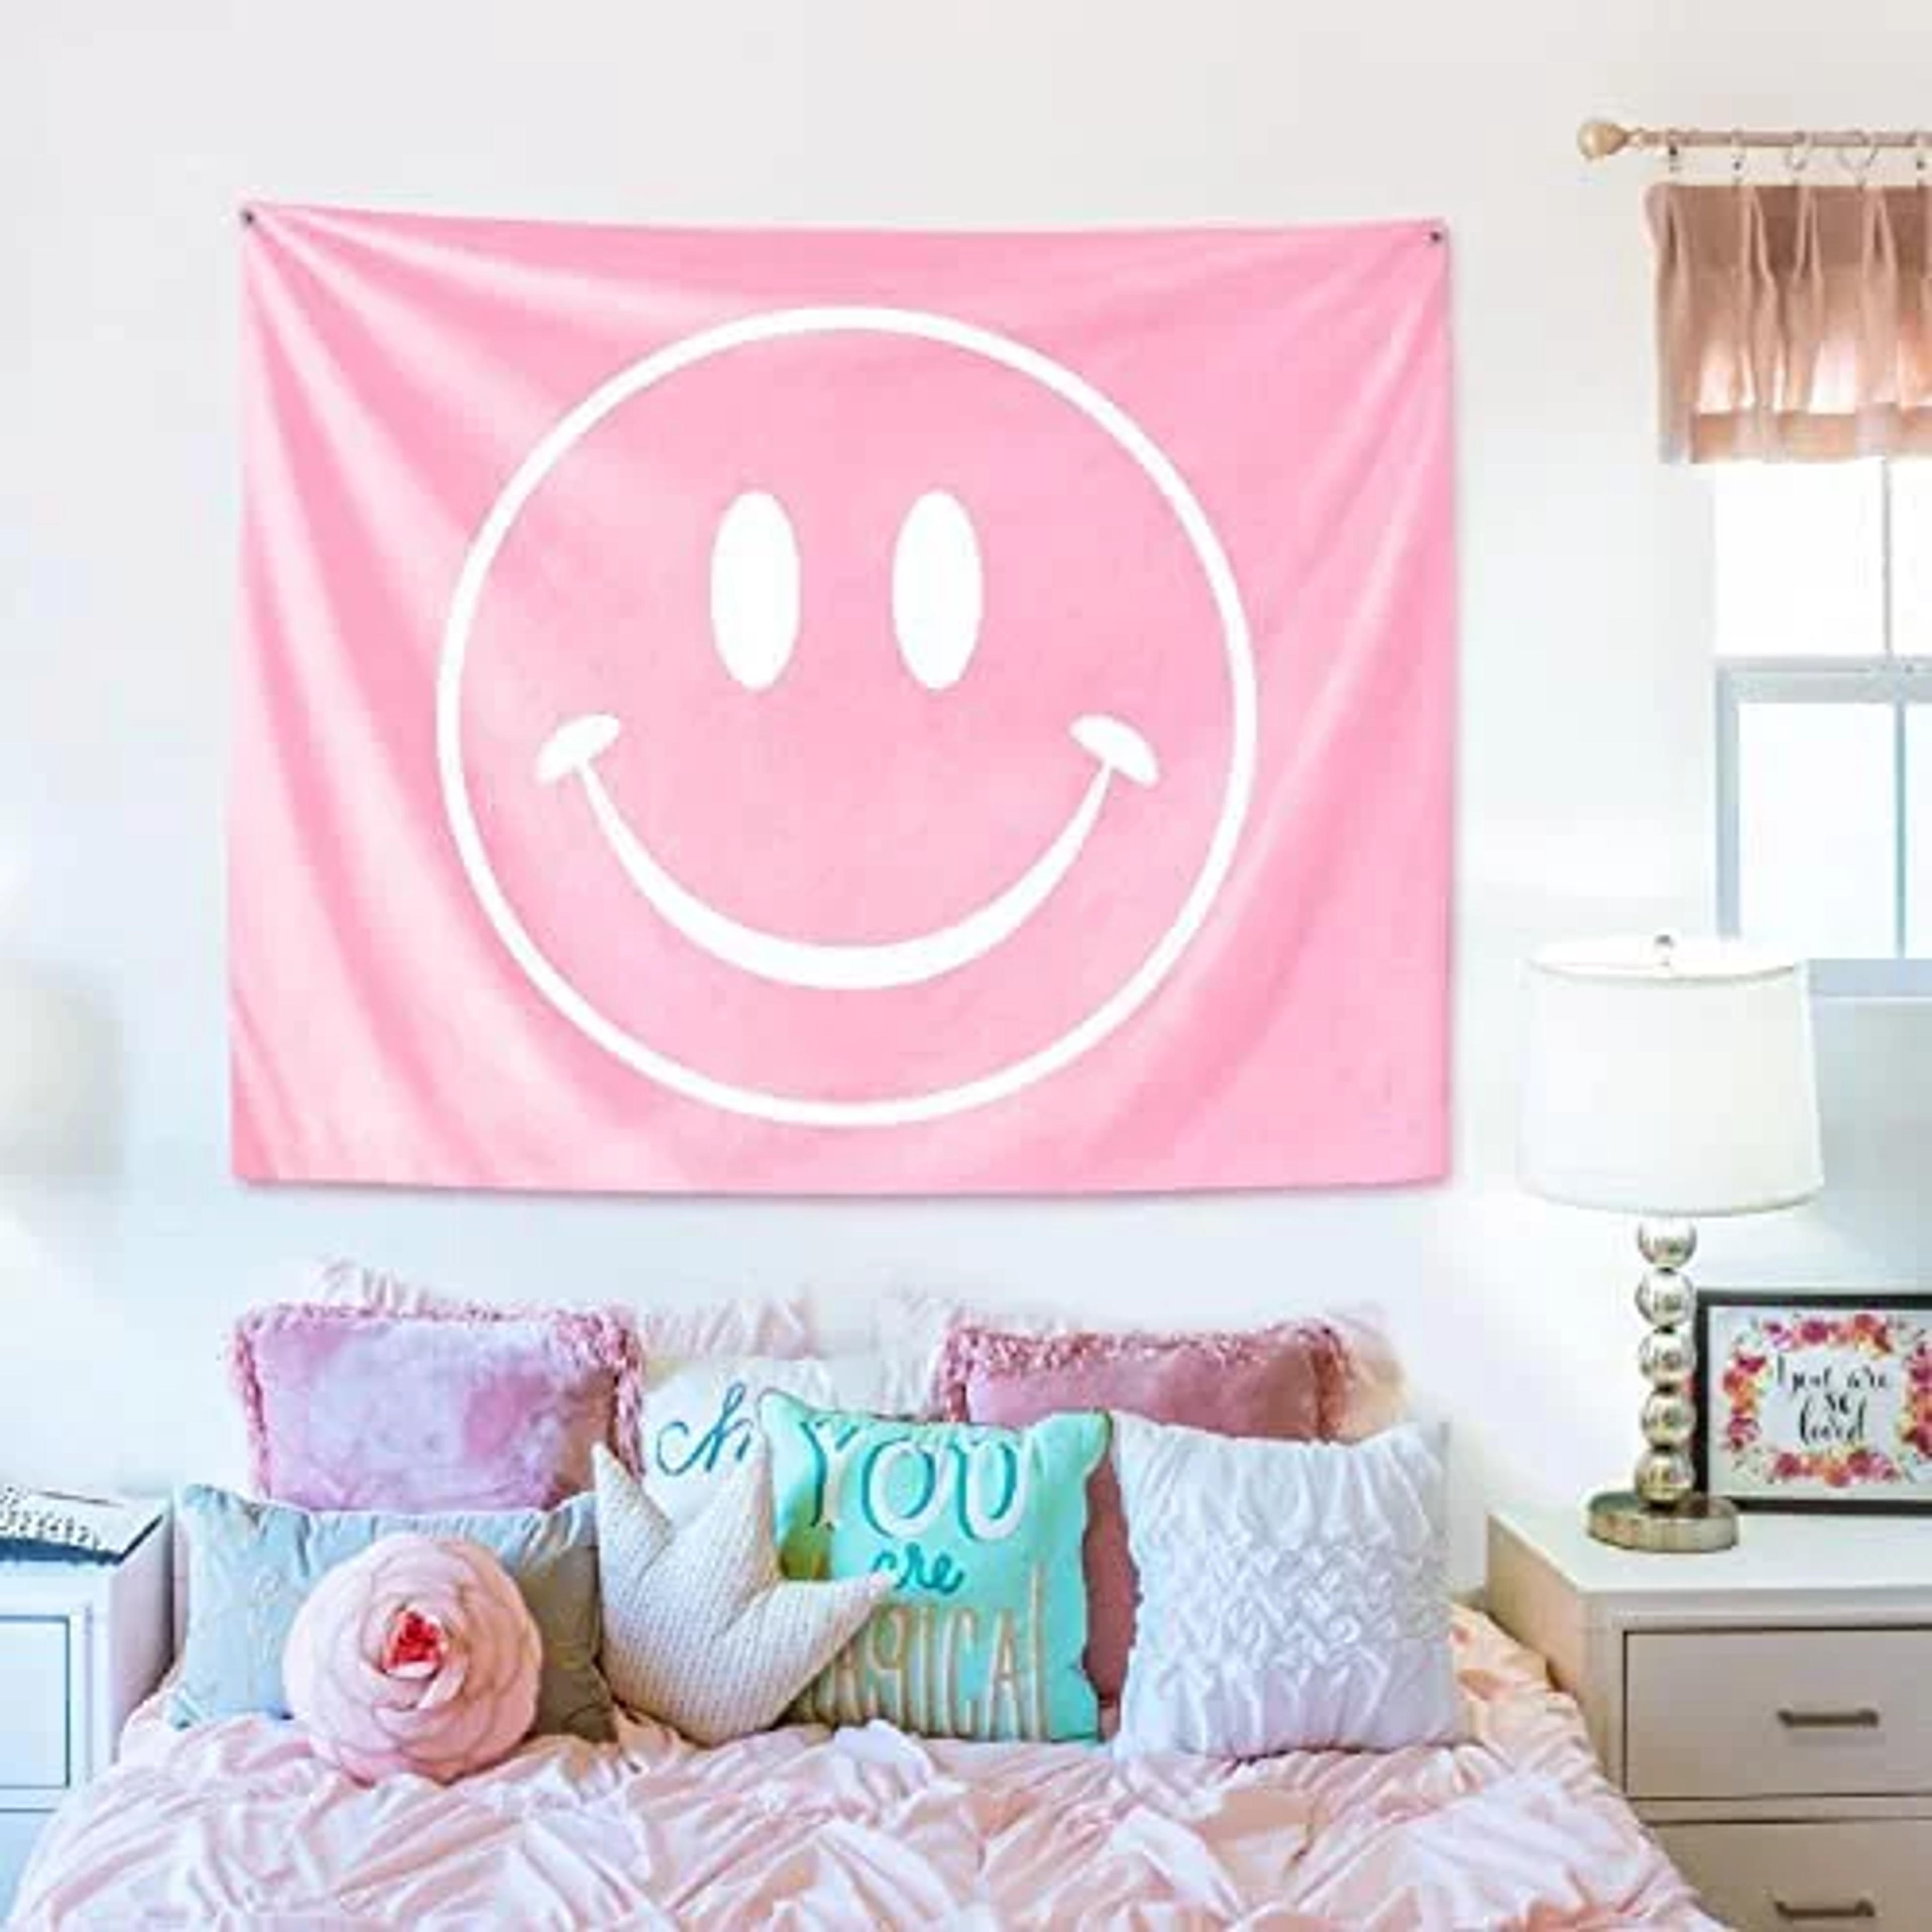 Pink Smiley Face Tapestry Cute Aesthetic Preppy Room Decor Teen Girls College Dorm Decor (60" x 50", Pink Smiley Face)